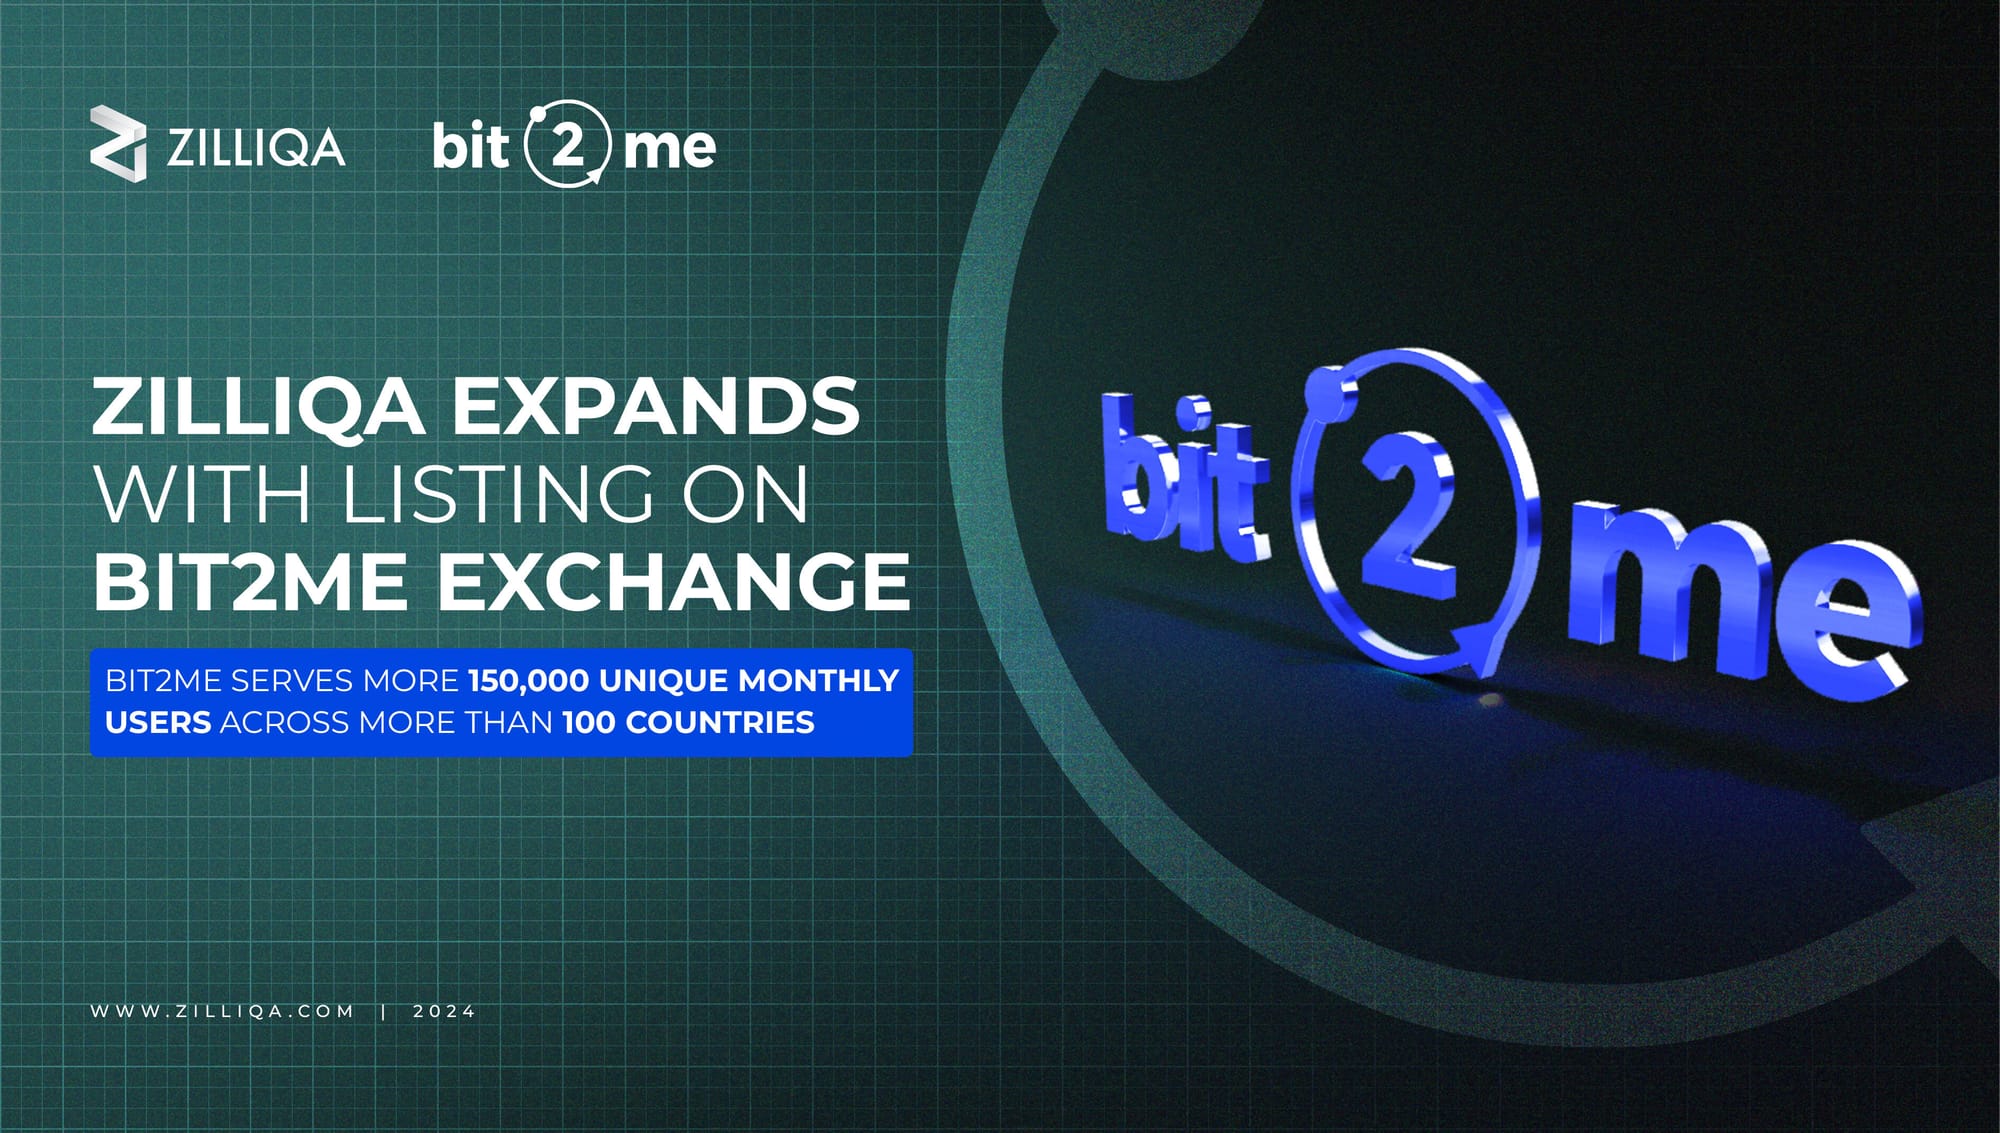 Zilliqa expands presence in Europe with listing on Bit2Me exchange